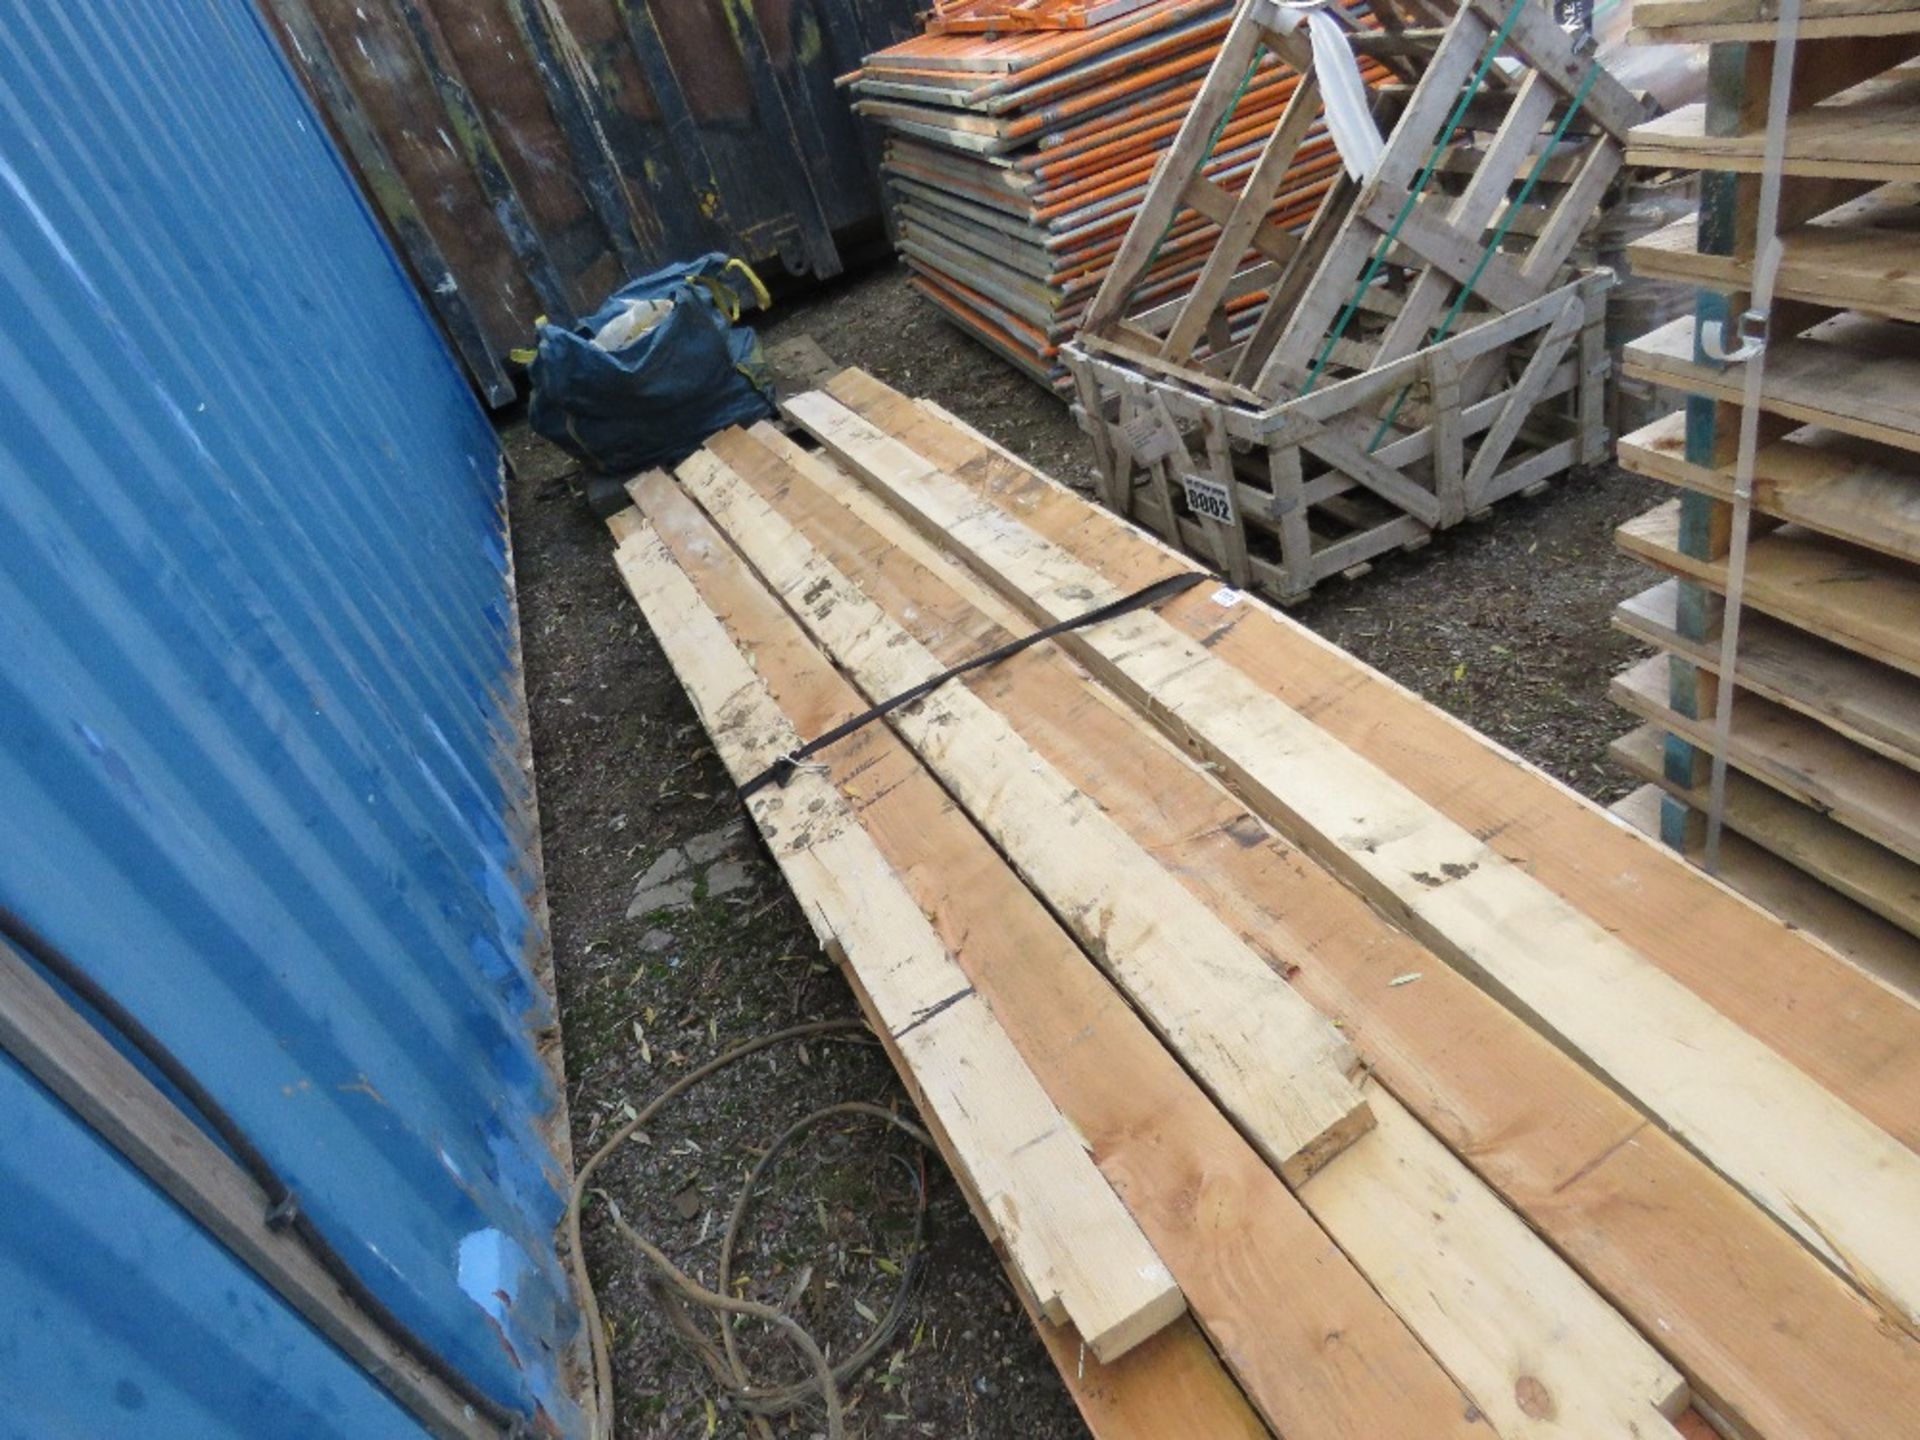 LARGE BUNDLE OF PRE USED TIMBERS, MOST 6" X 2" AND BEING 9FT - 16FT LENGTH APPROX. SOLD UNDER THE A - Image 5 of 5